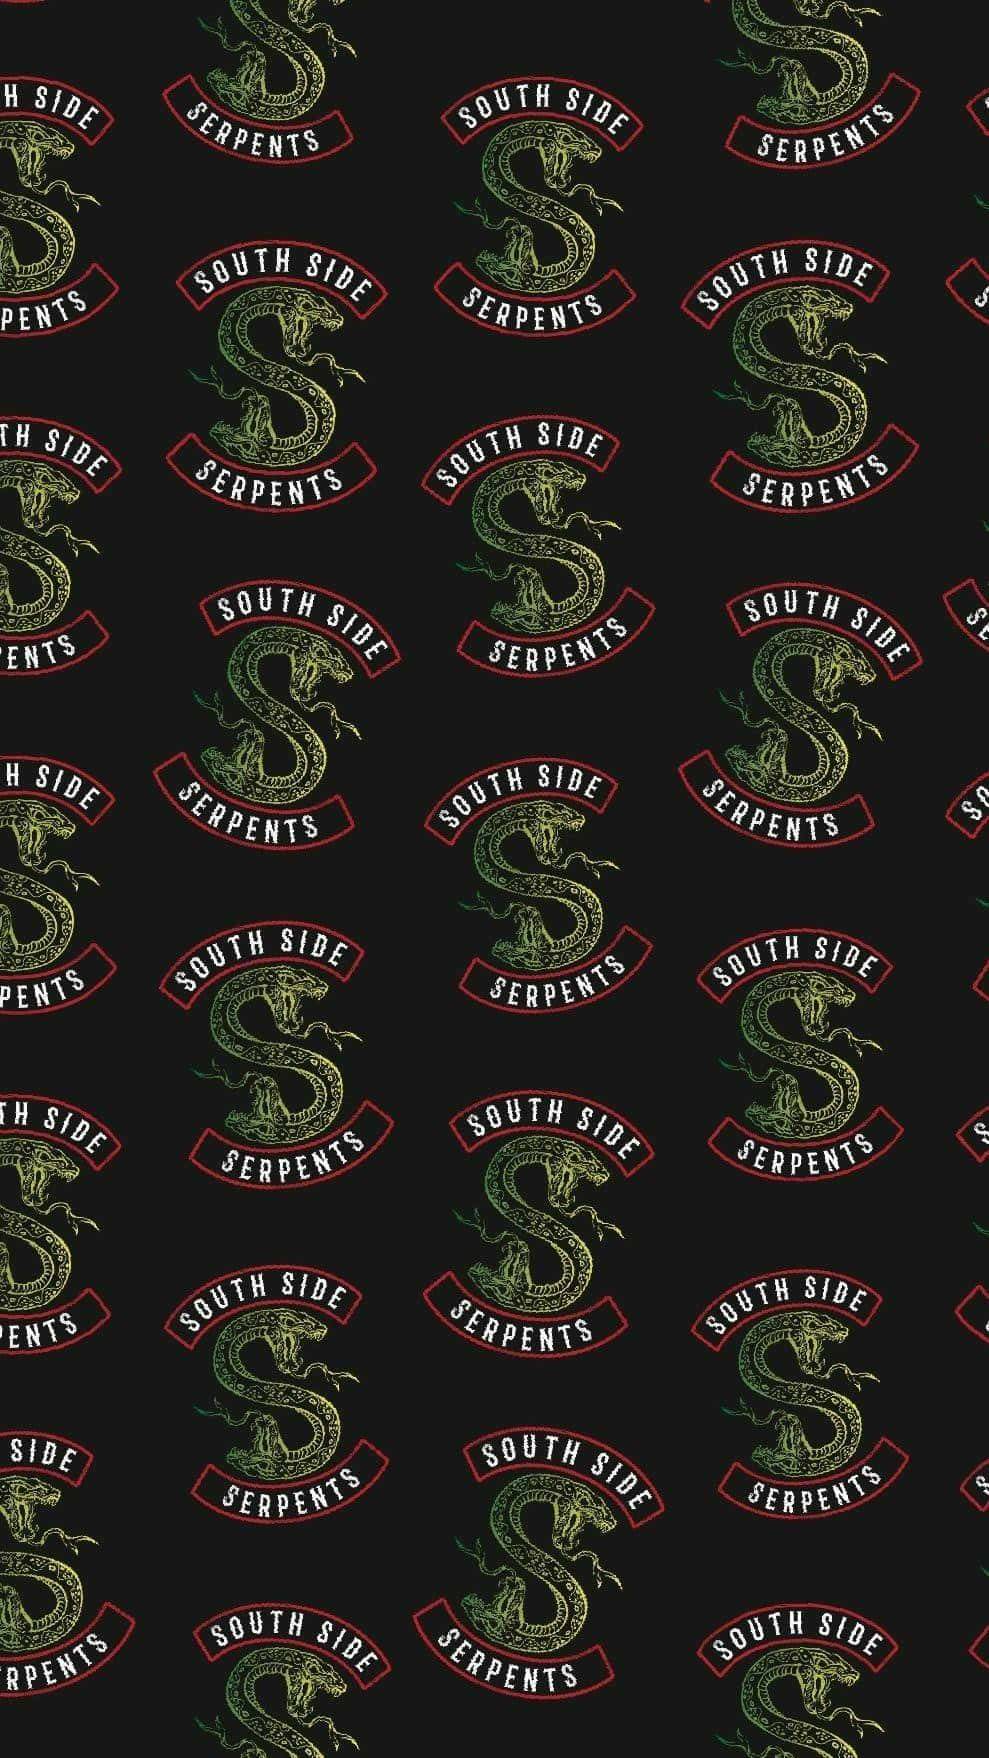 "A Proud Member of the Southside Serpents" Wallpaper